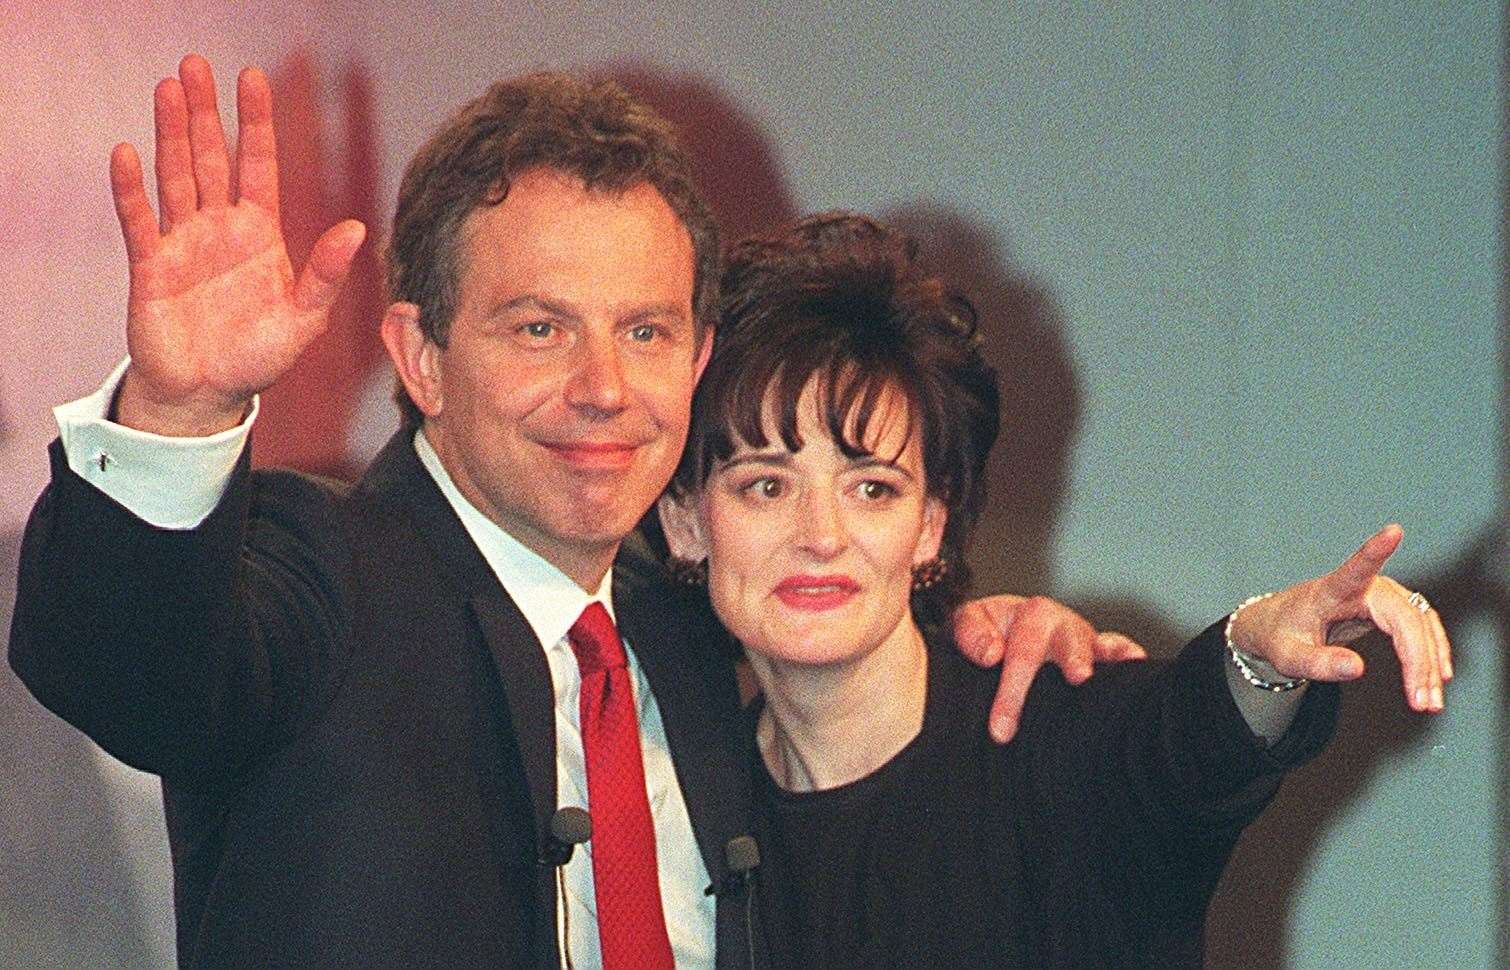 Tony Blair, pictured with his wife Cherie, became prime minister in May 1997 but was unable to attend the Irish Famine memorial event (Neil Munns/PA)